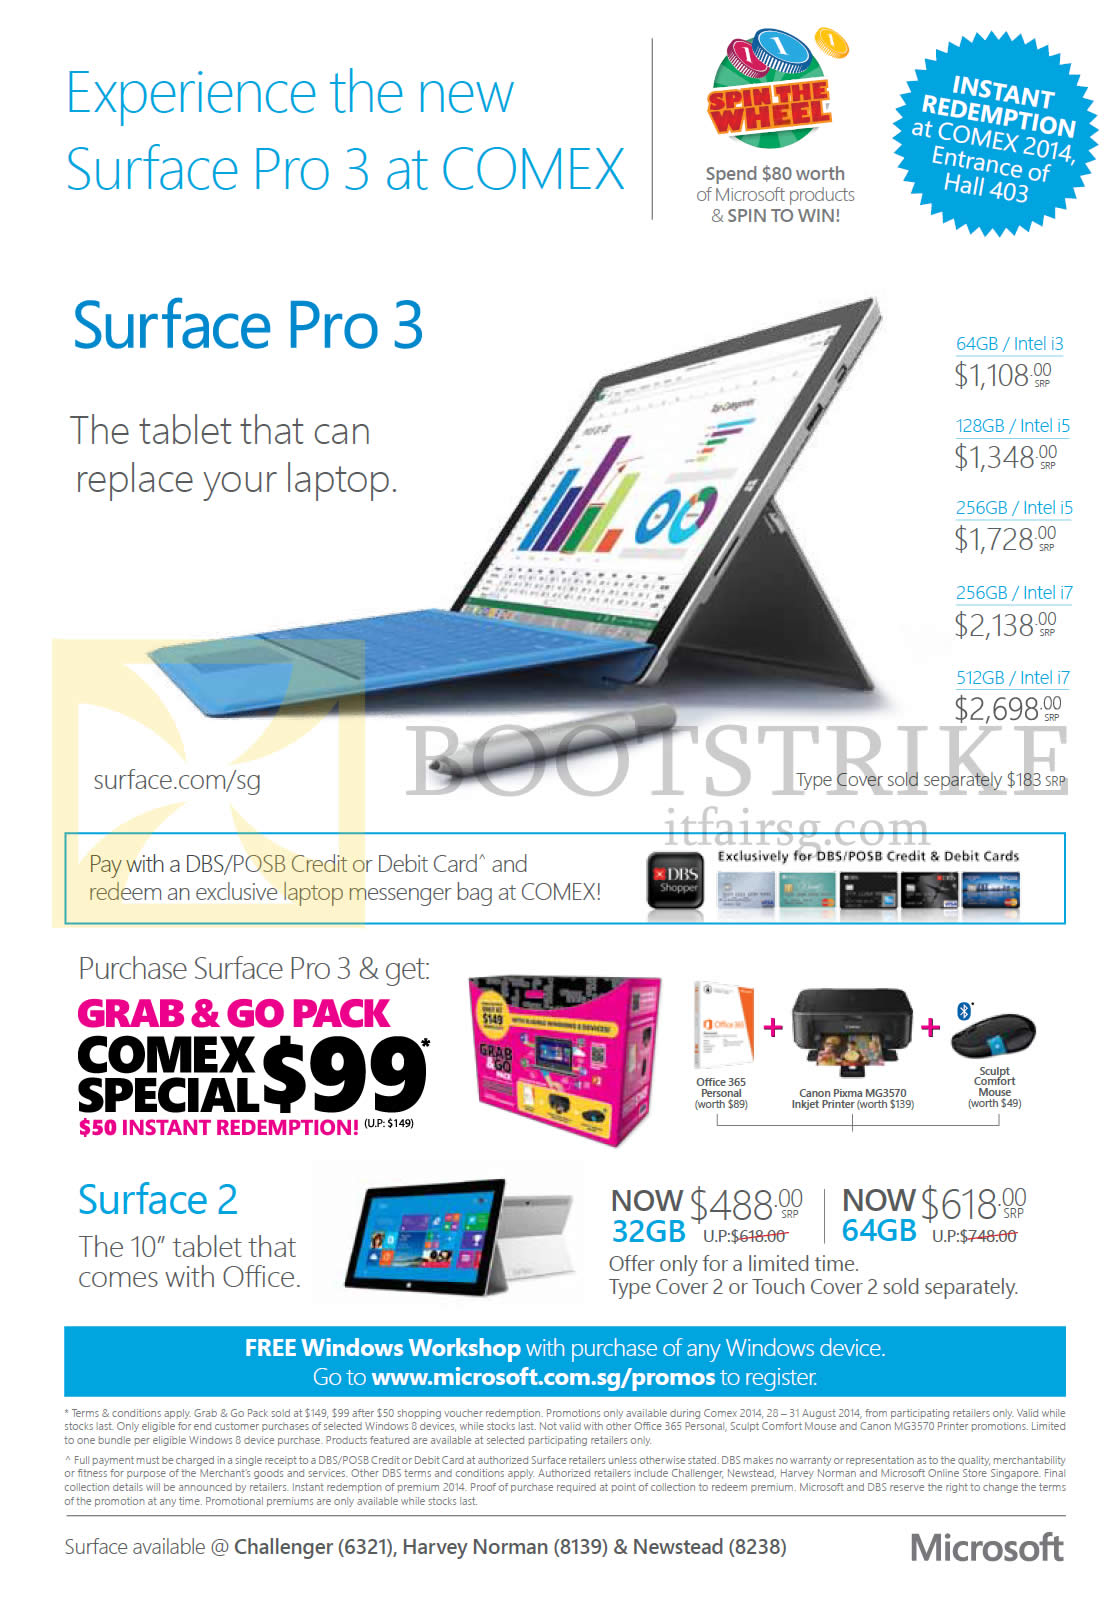 COMEX 2014 price list image brochure of Microsoft Surface Pro 3 Tablet, Surface 2, Grab N Go Pack